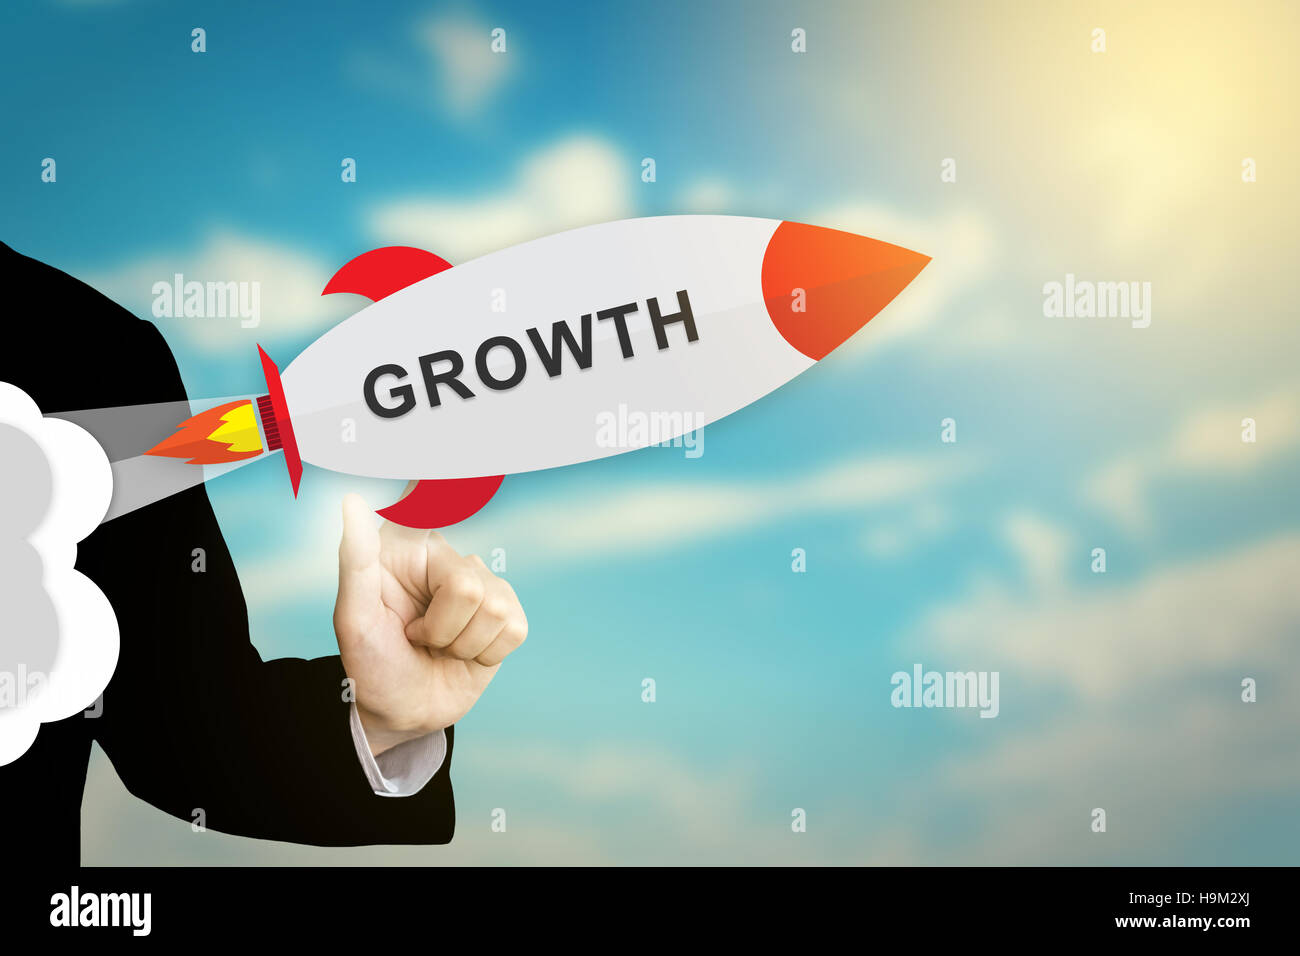 business hand clicking growth flat design rocket Stock Photo